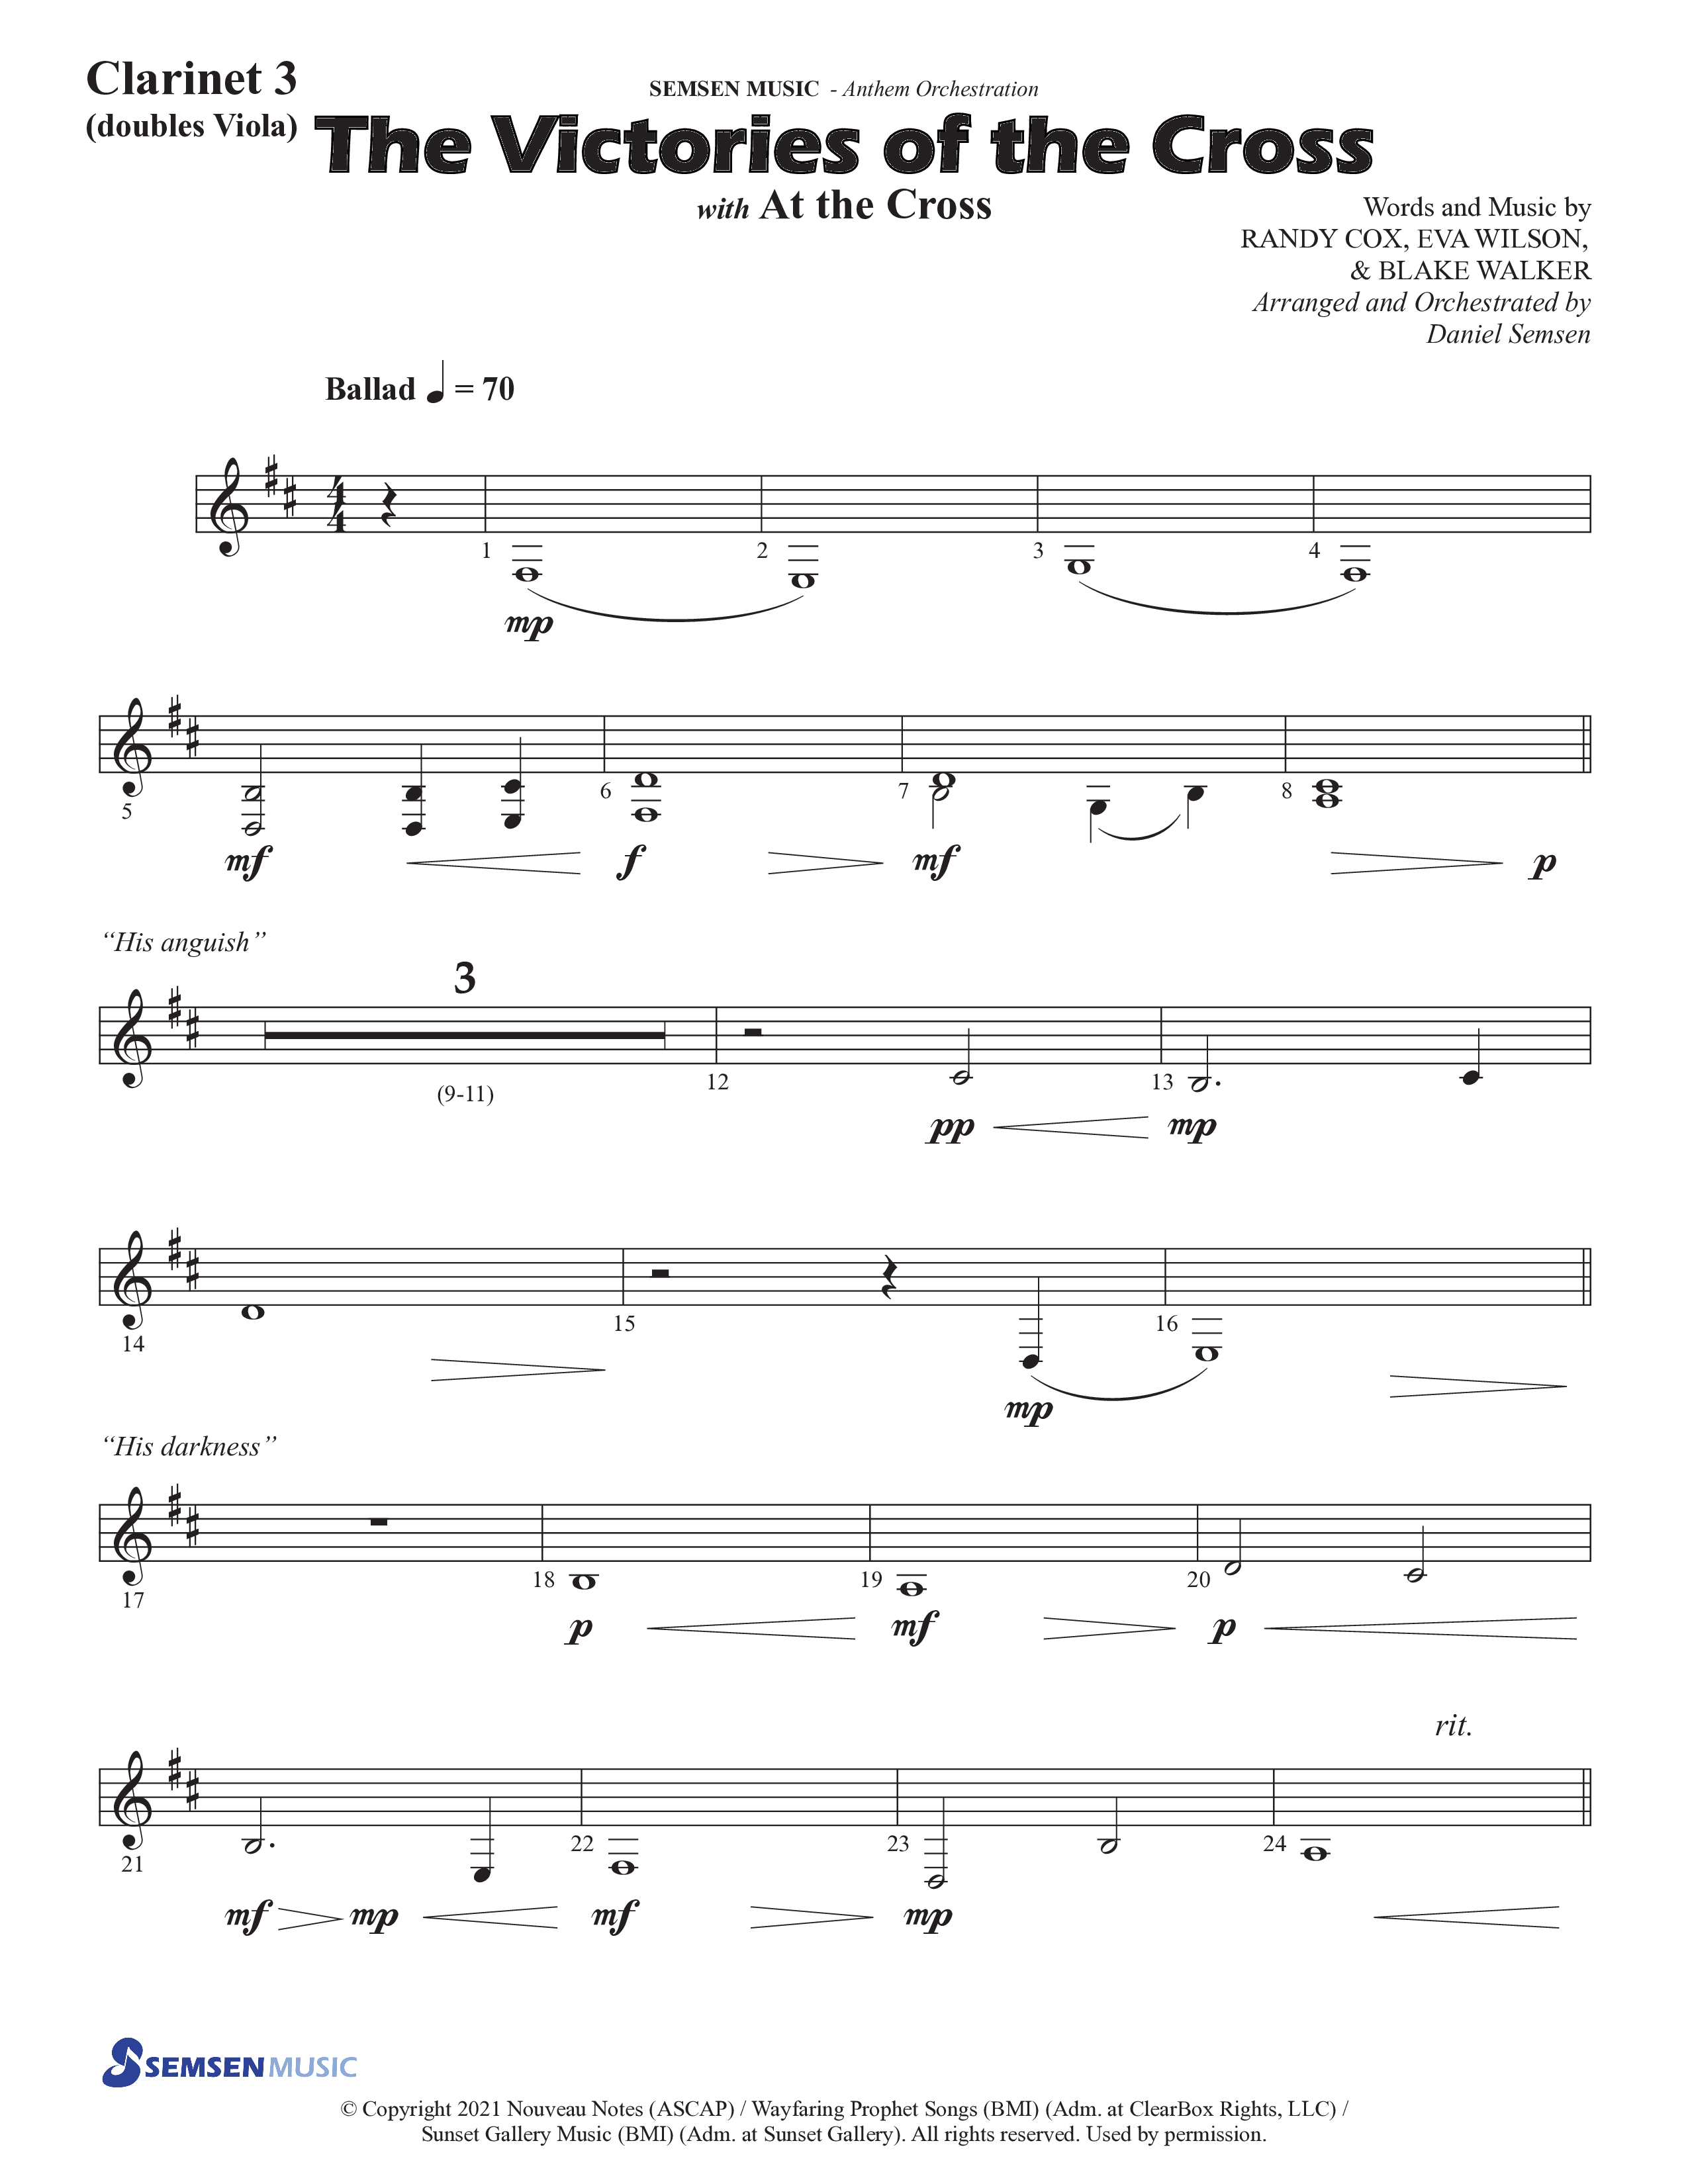 The Victories Of The Cross (with At The Cross) (Choral Anthem SATB) Clarinet 3 (Semsen Music / Arr. Daniel Semsen)